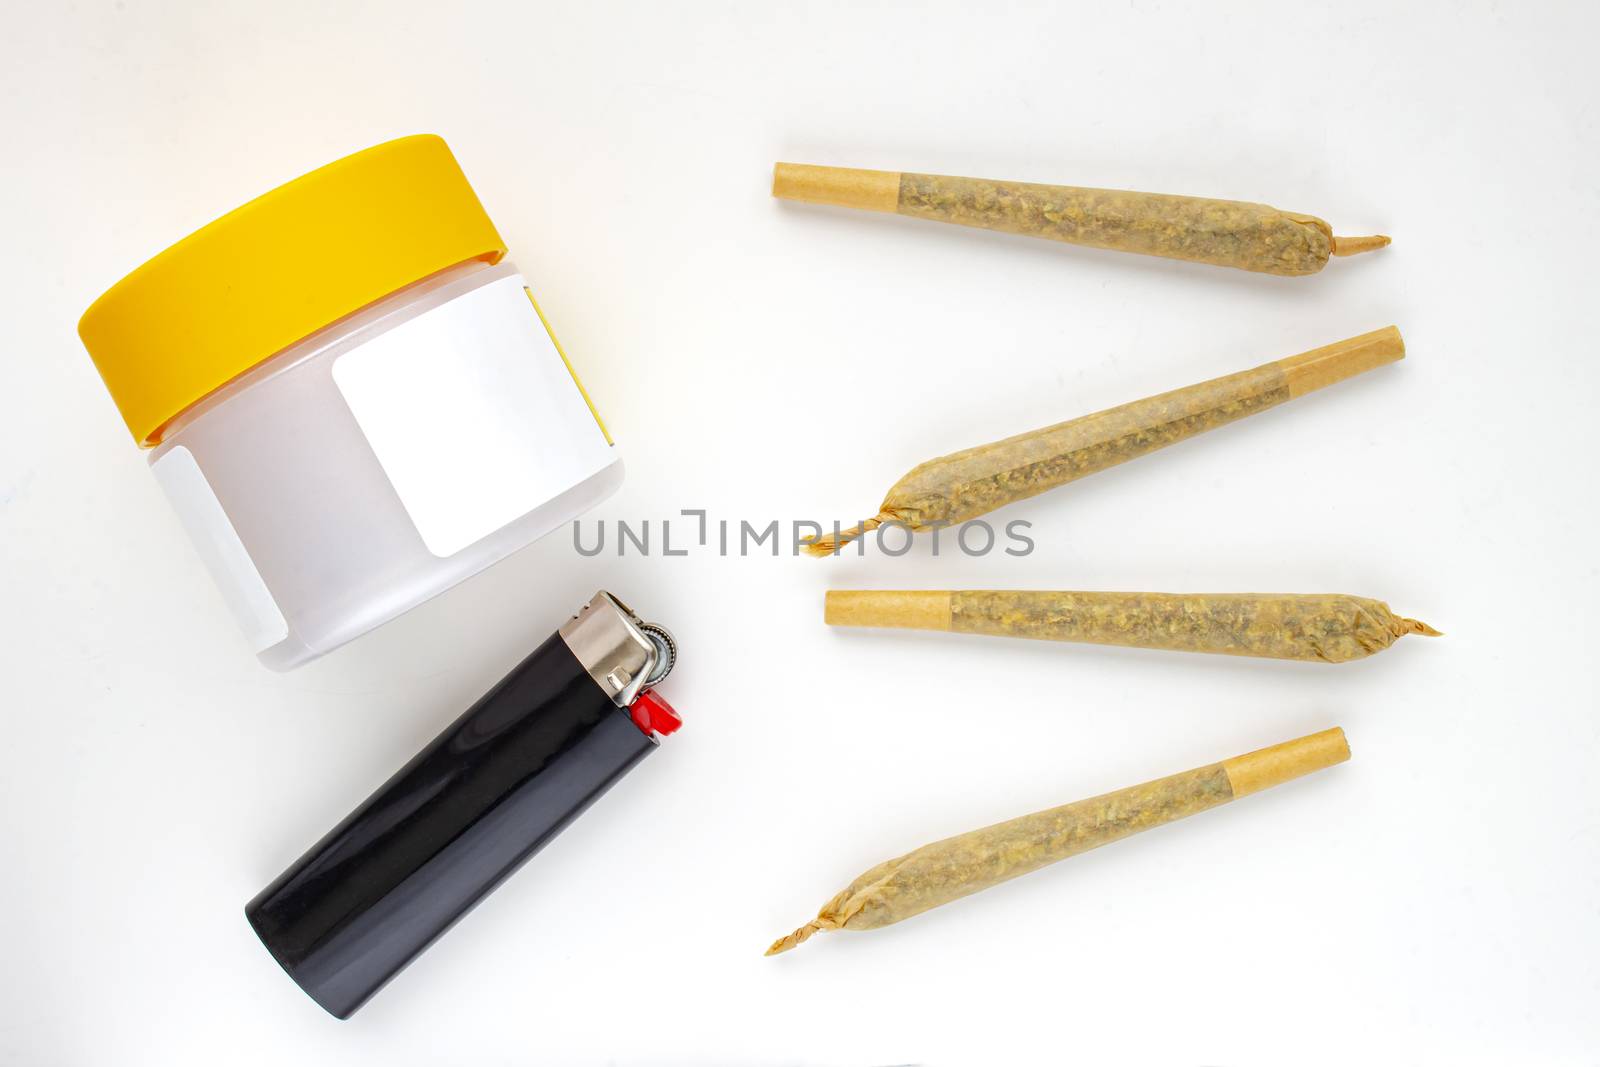 A Cannabis white and yellow plastic packaging container with Cigarettes, Prerolls or Joints and a lighter on a white background by oasisamuel